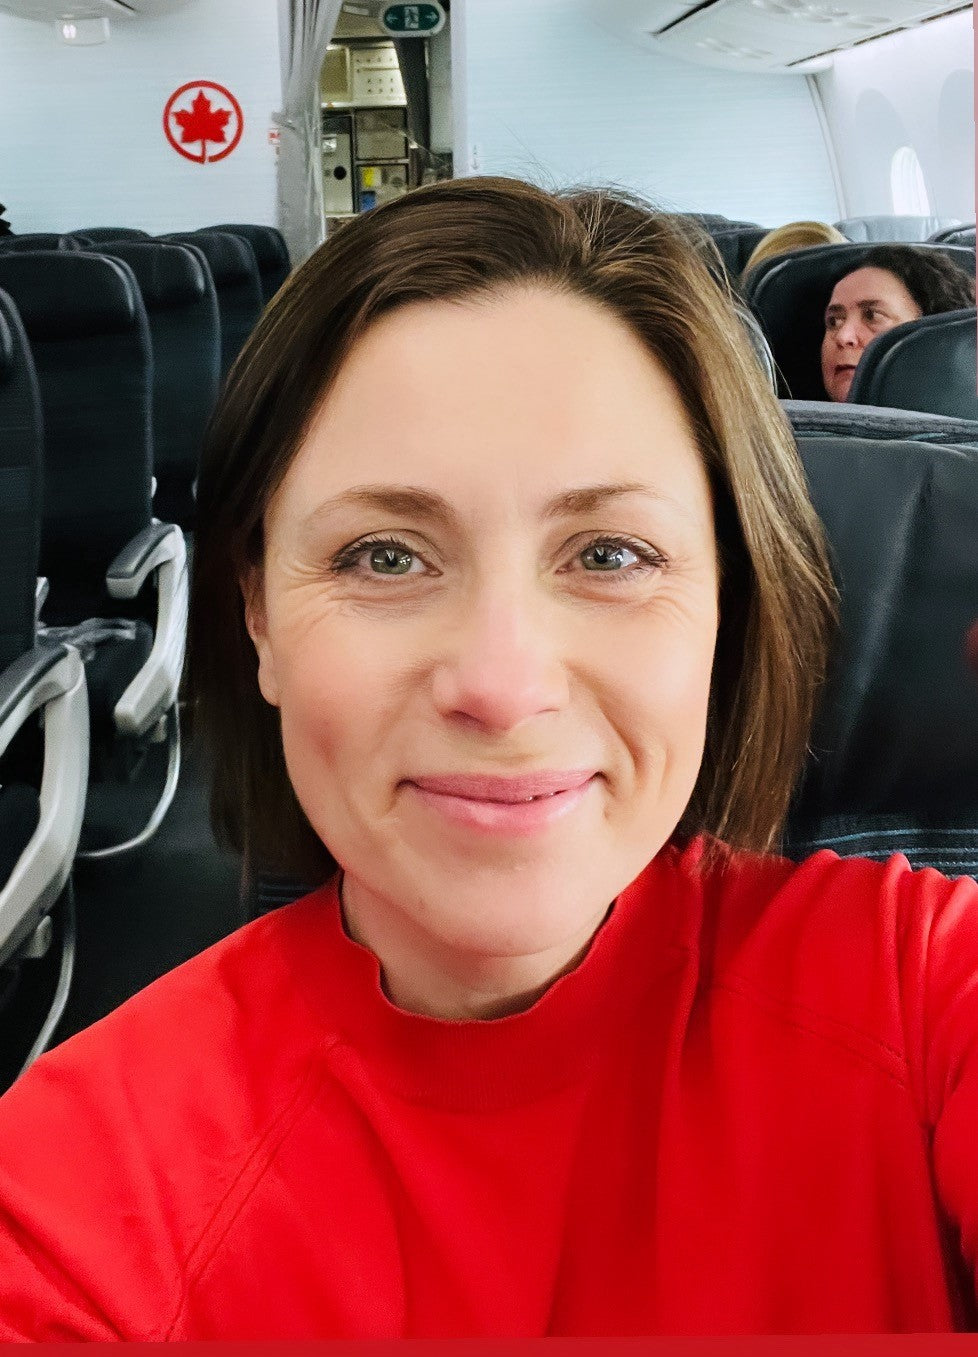 Louise smiling wearing red top on air Canada flight